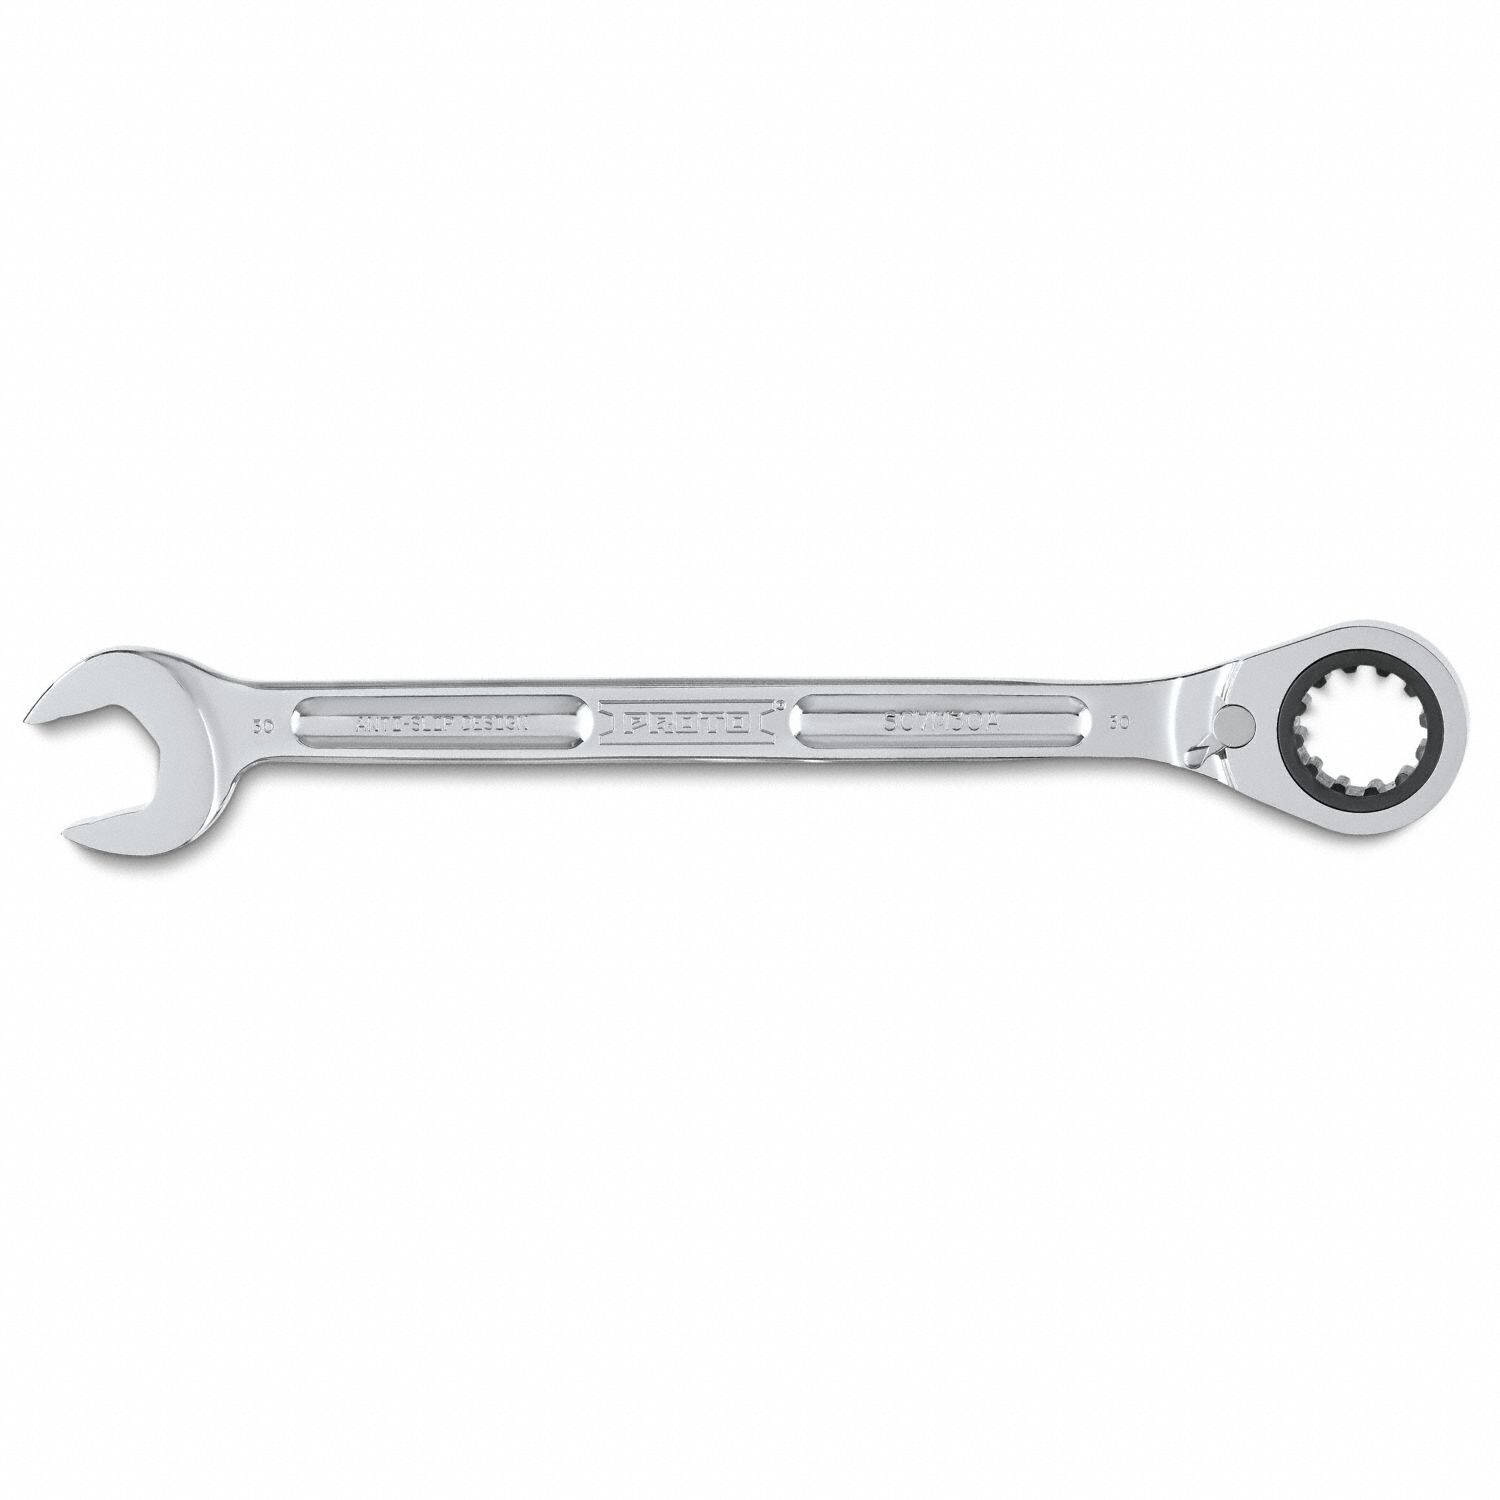 PROTO Combination Wrenches: Alloy Steel, Full Polish Chrome, 30 mm Head  Size, 15 3/4 in Overall Lg